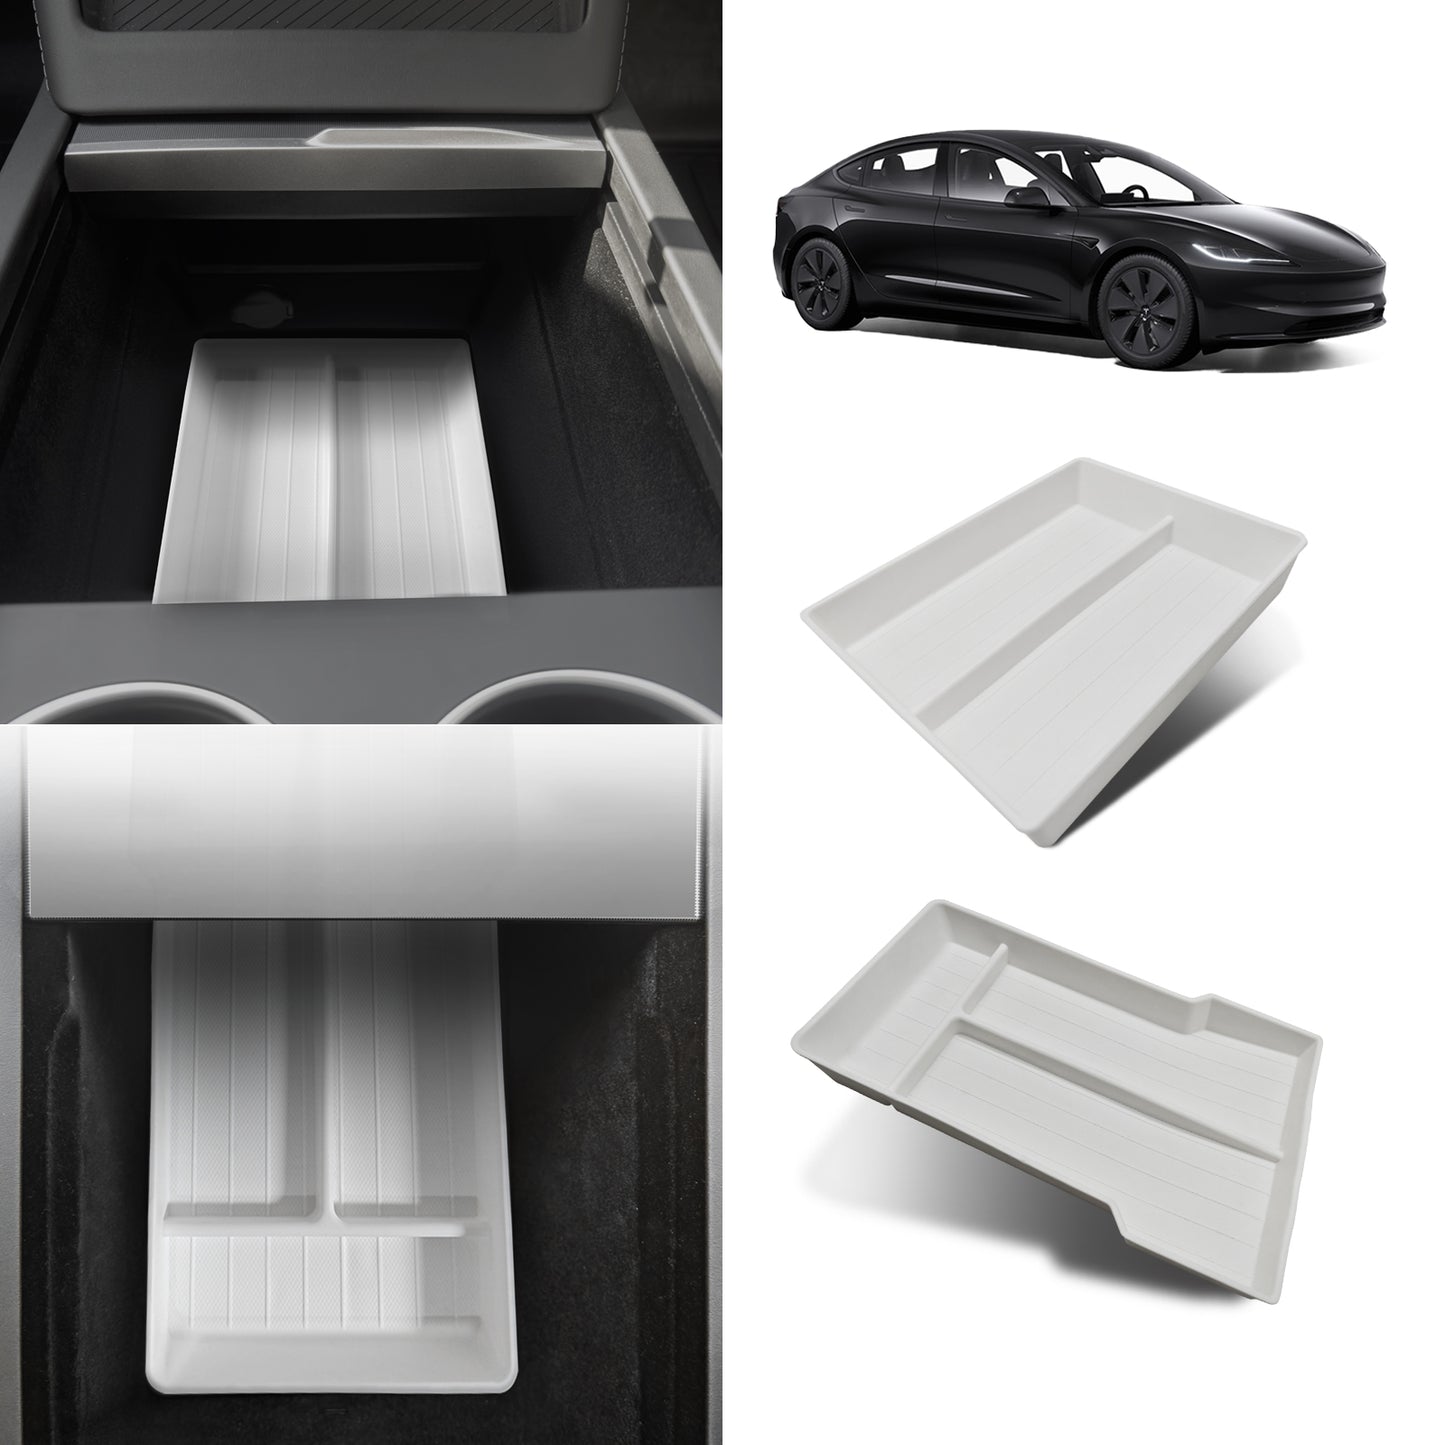 TPE Center Console Organizer Tray - Lower for New Model 3 from BestEvMod